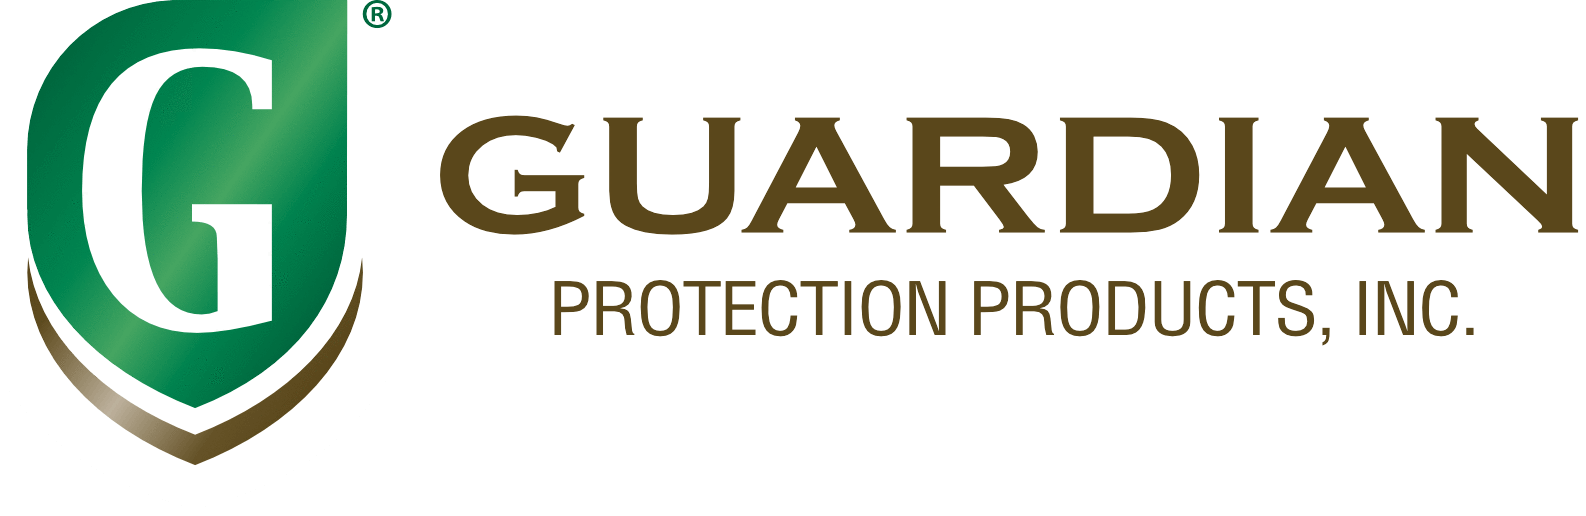 Canal Furniture 5 Year Guardian Protection Plan